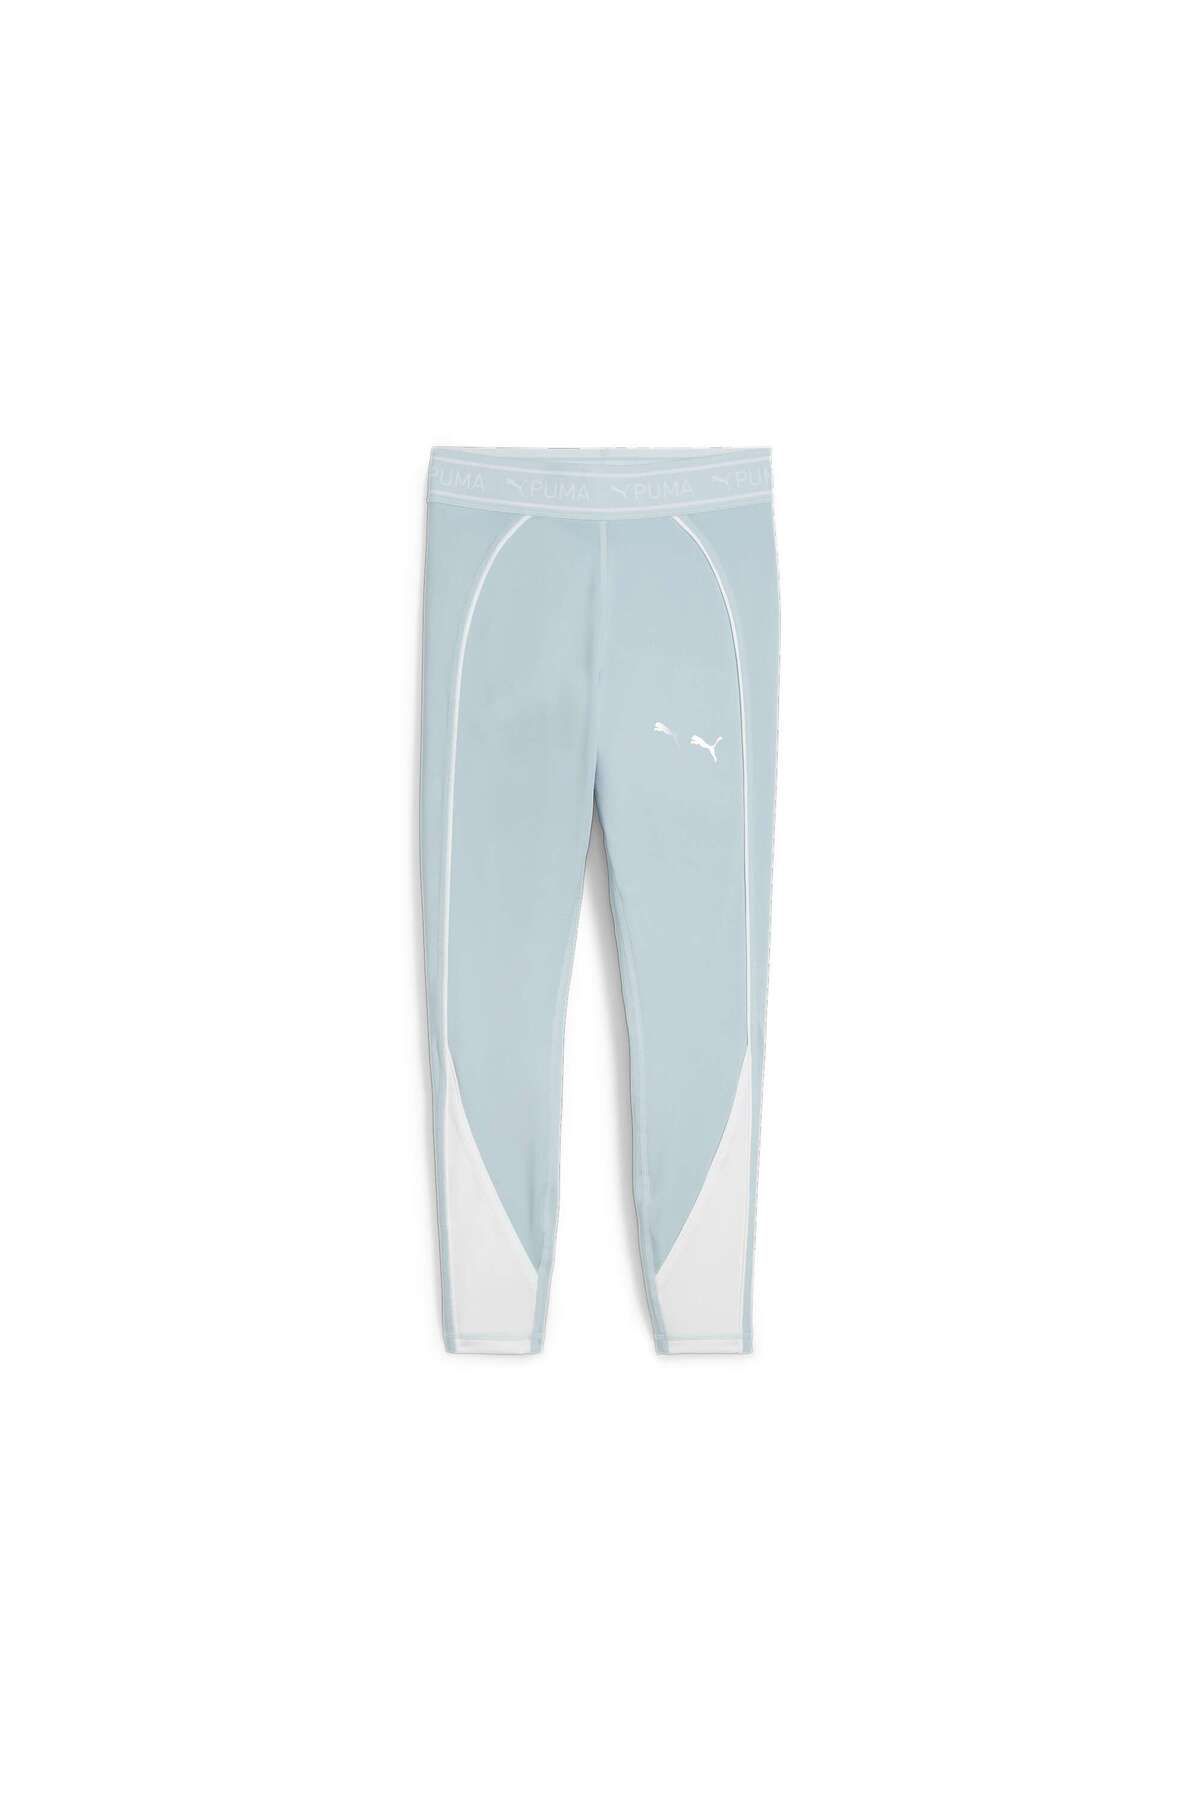 Puma FIT STRONG 7/8 TIGHT